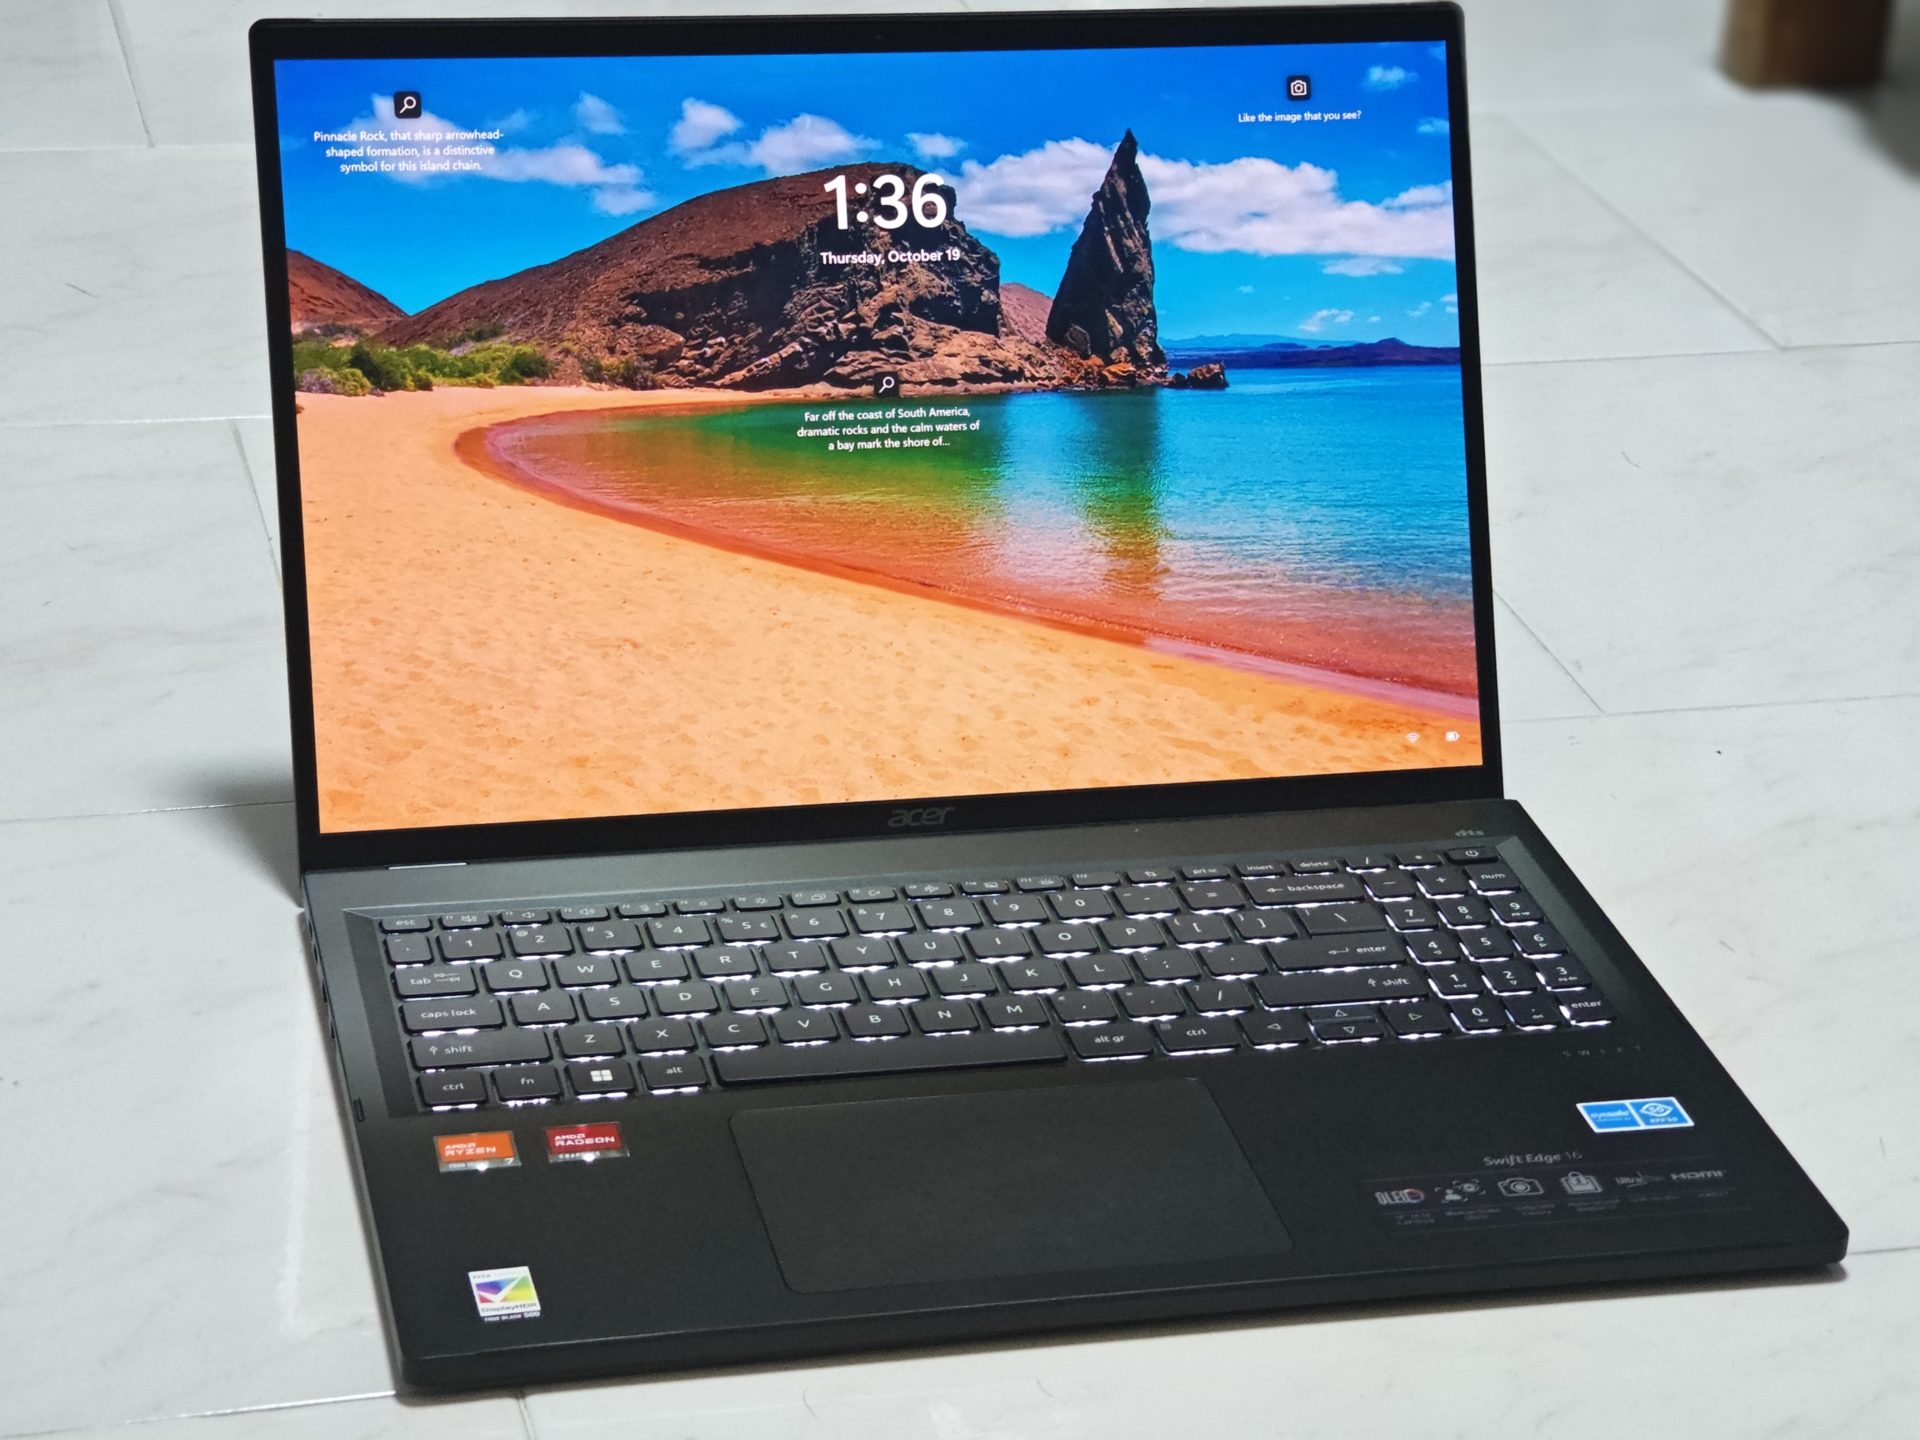 Lenovo IdeaPad Slim 1 Review: Budget laptop with decent performance - The  Tech Revolutionist